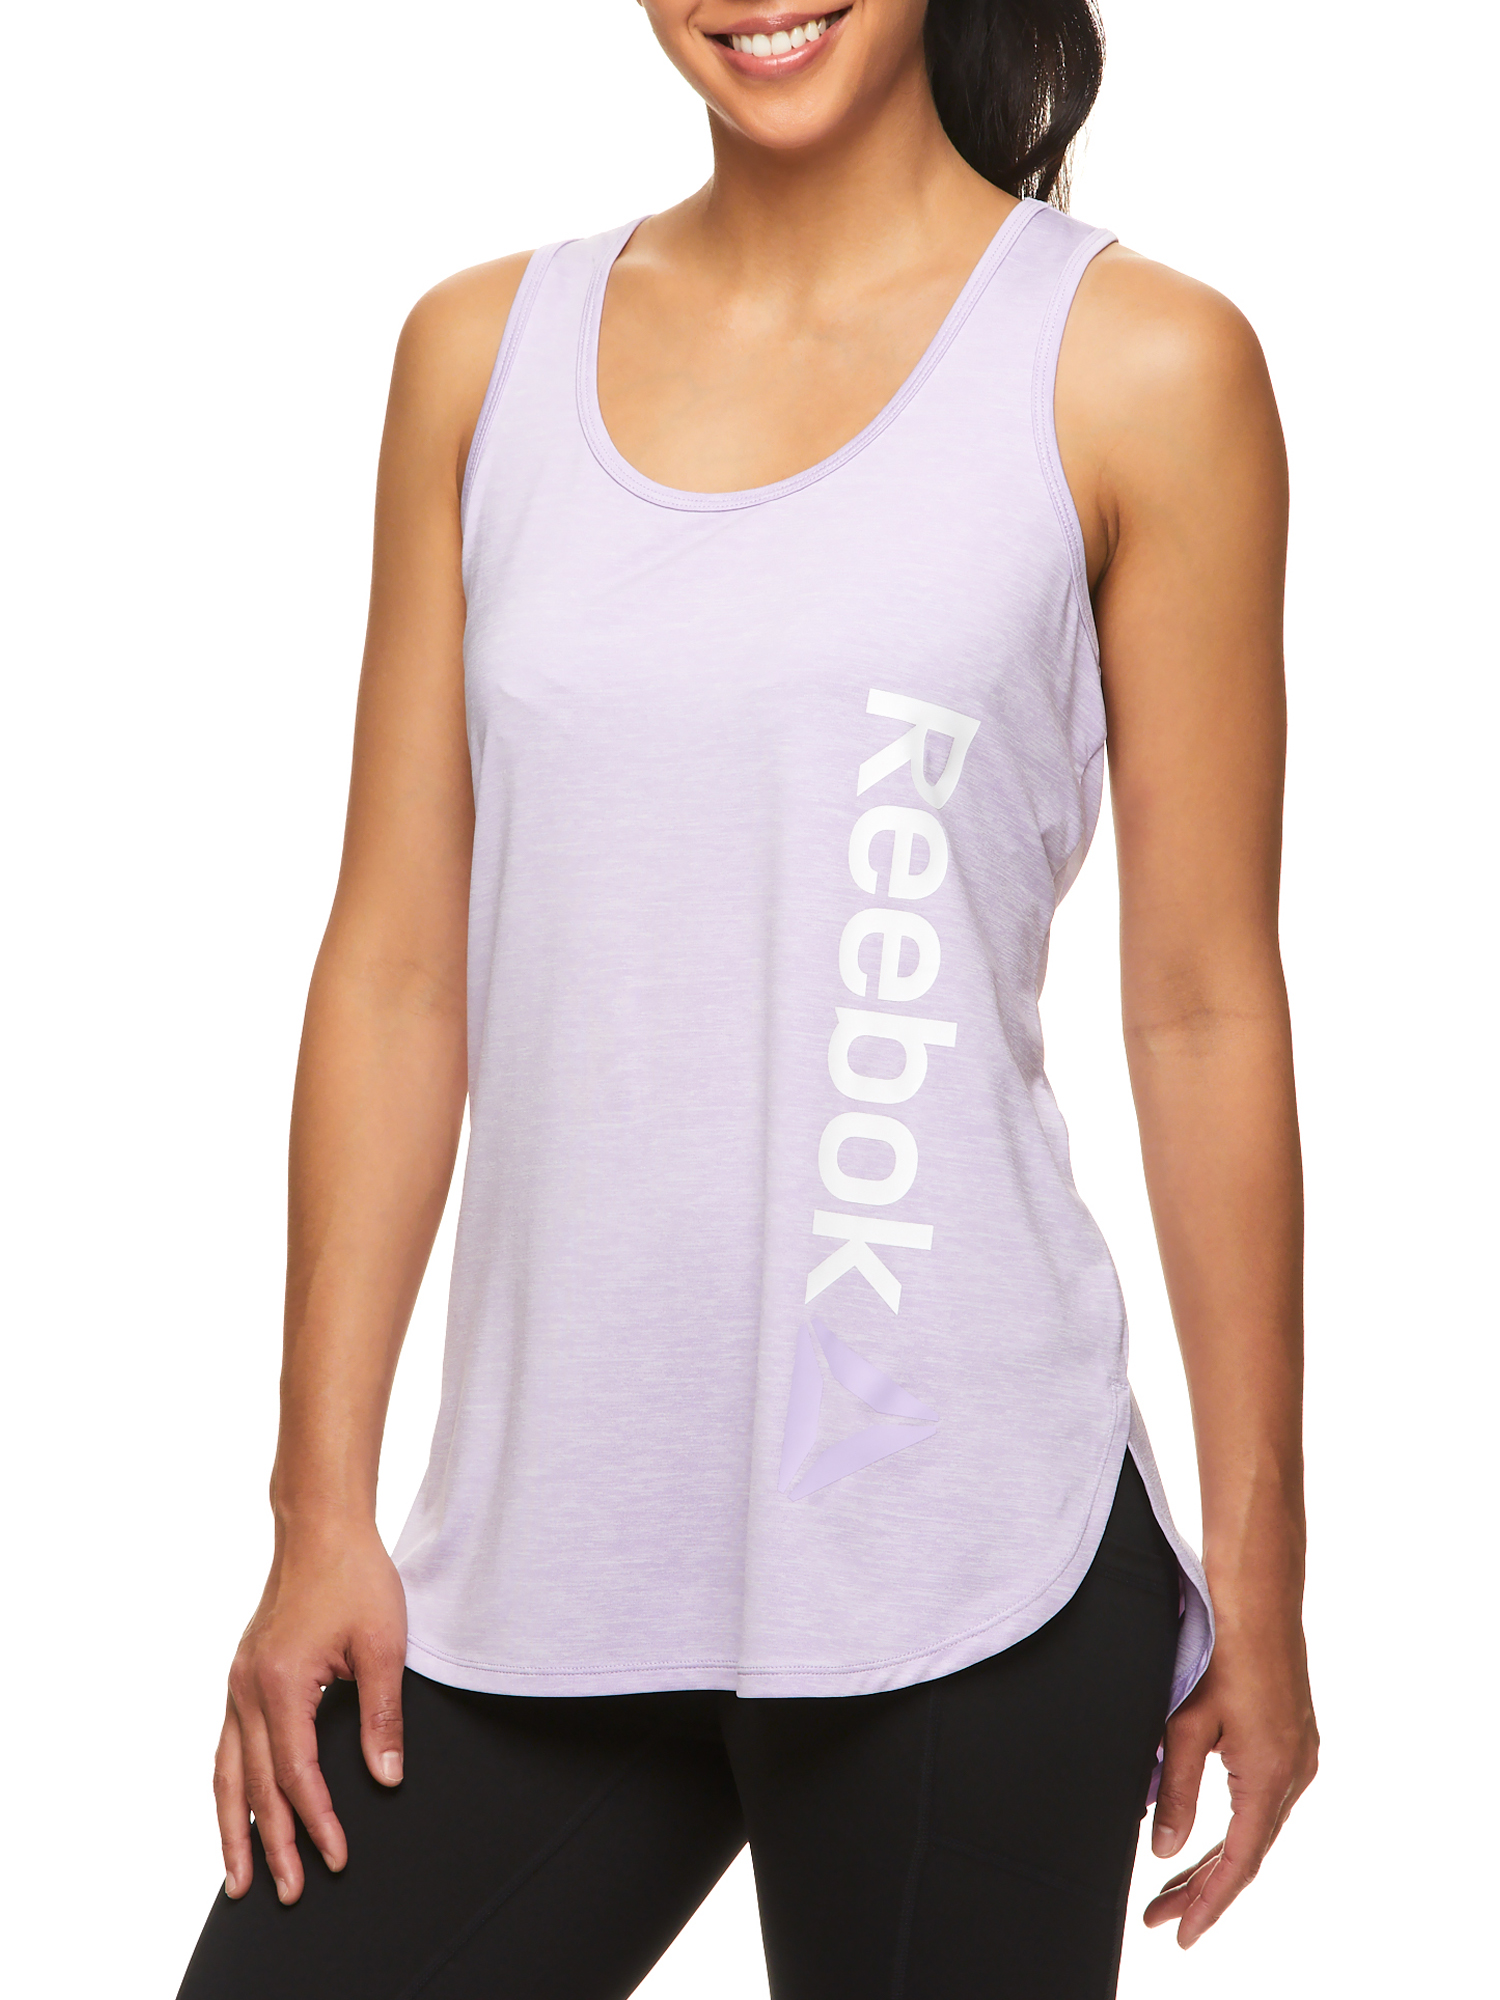 Reebok Women's Mythic Graphic Tank Top - image 1 of 4